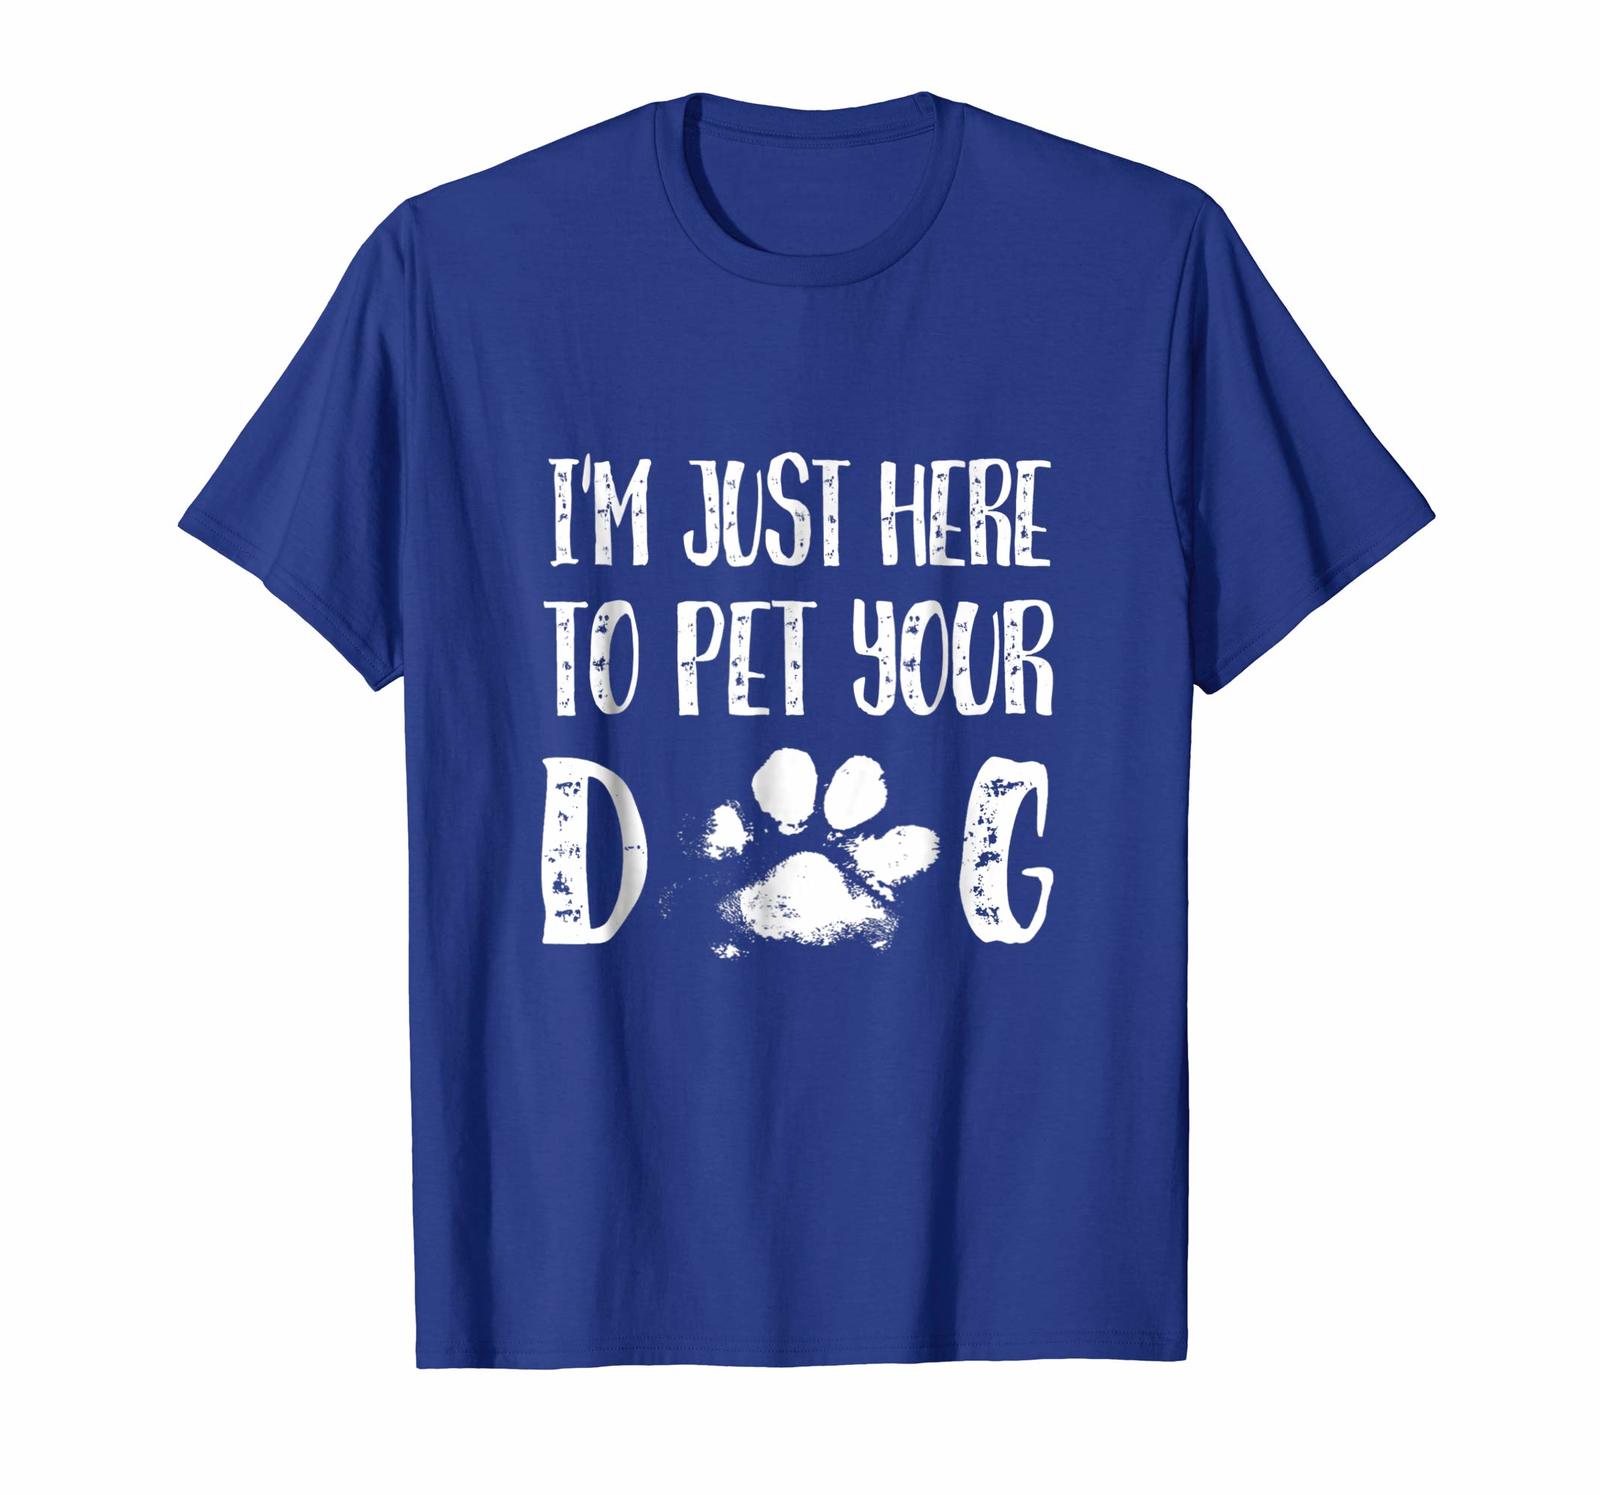 New Tee - I'm Just Here to Pet Your Dog Funny Saying T-shirt Men - T-Shirts